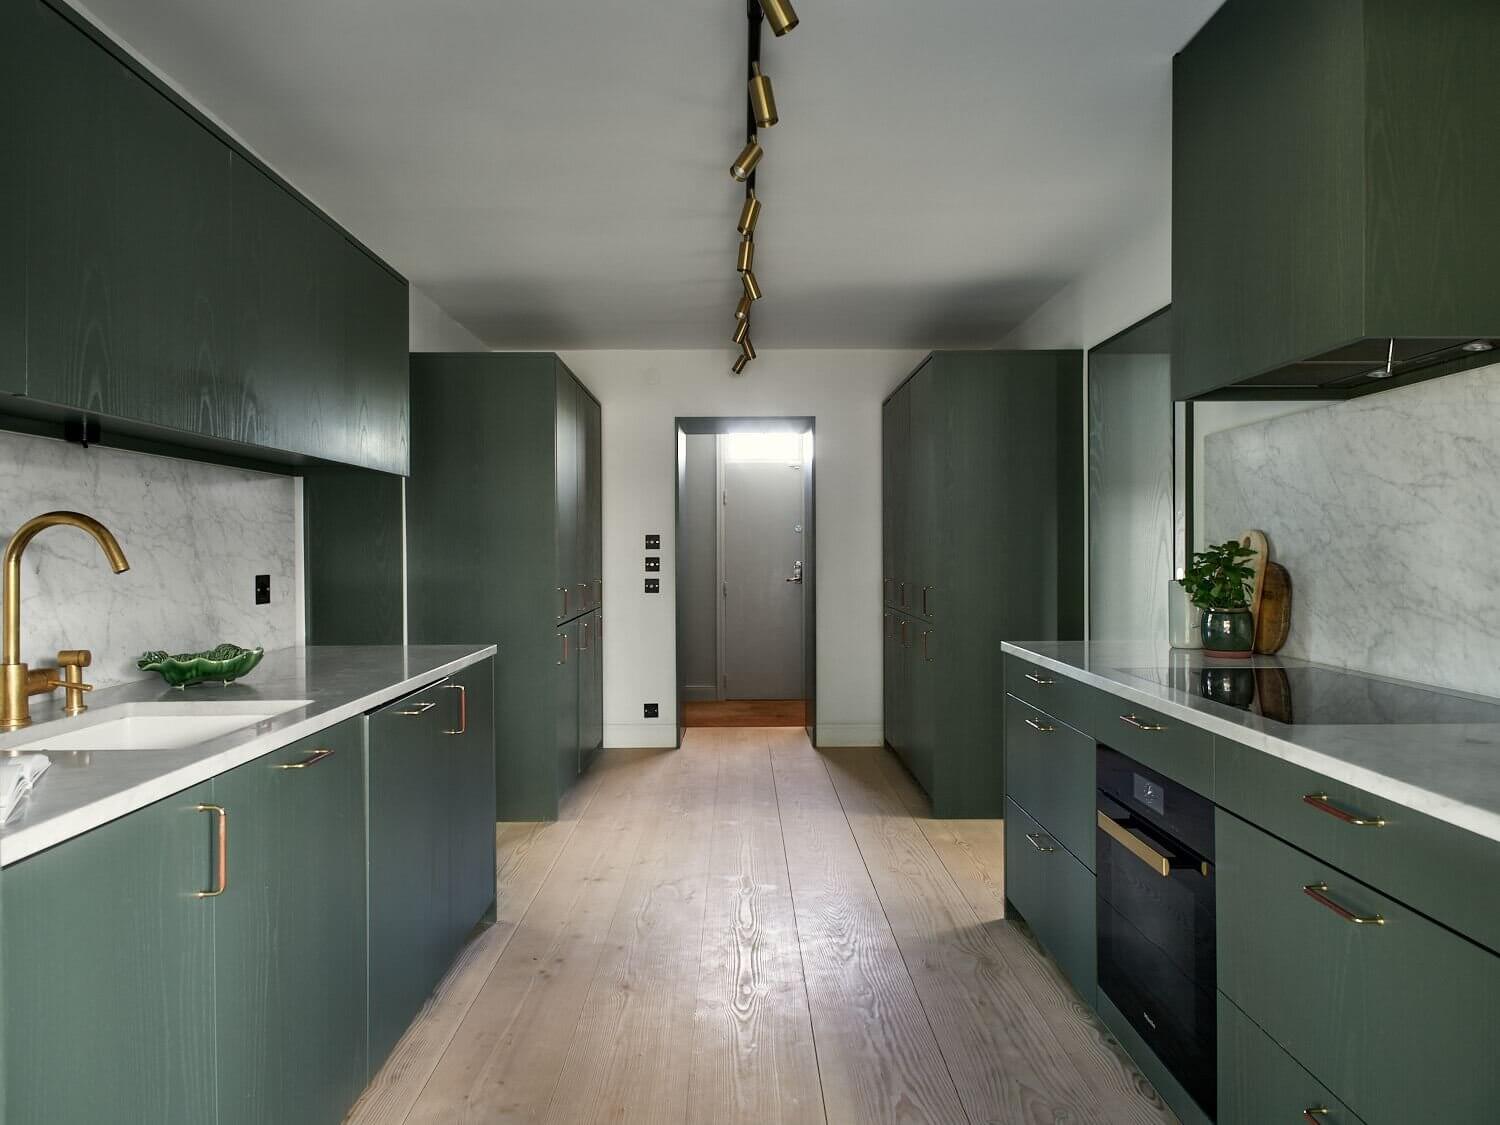 chapel conversion sweden nordroom5 A Modern Green Home in an Early 20th-Century Chapel